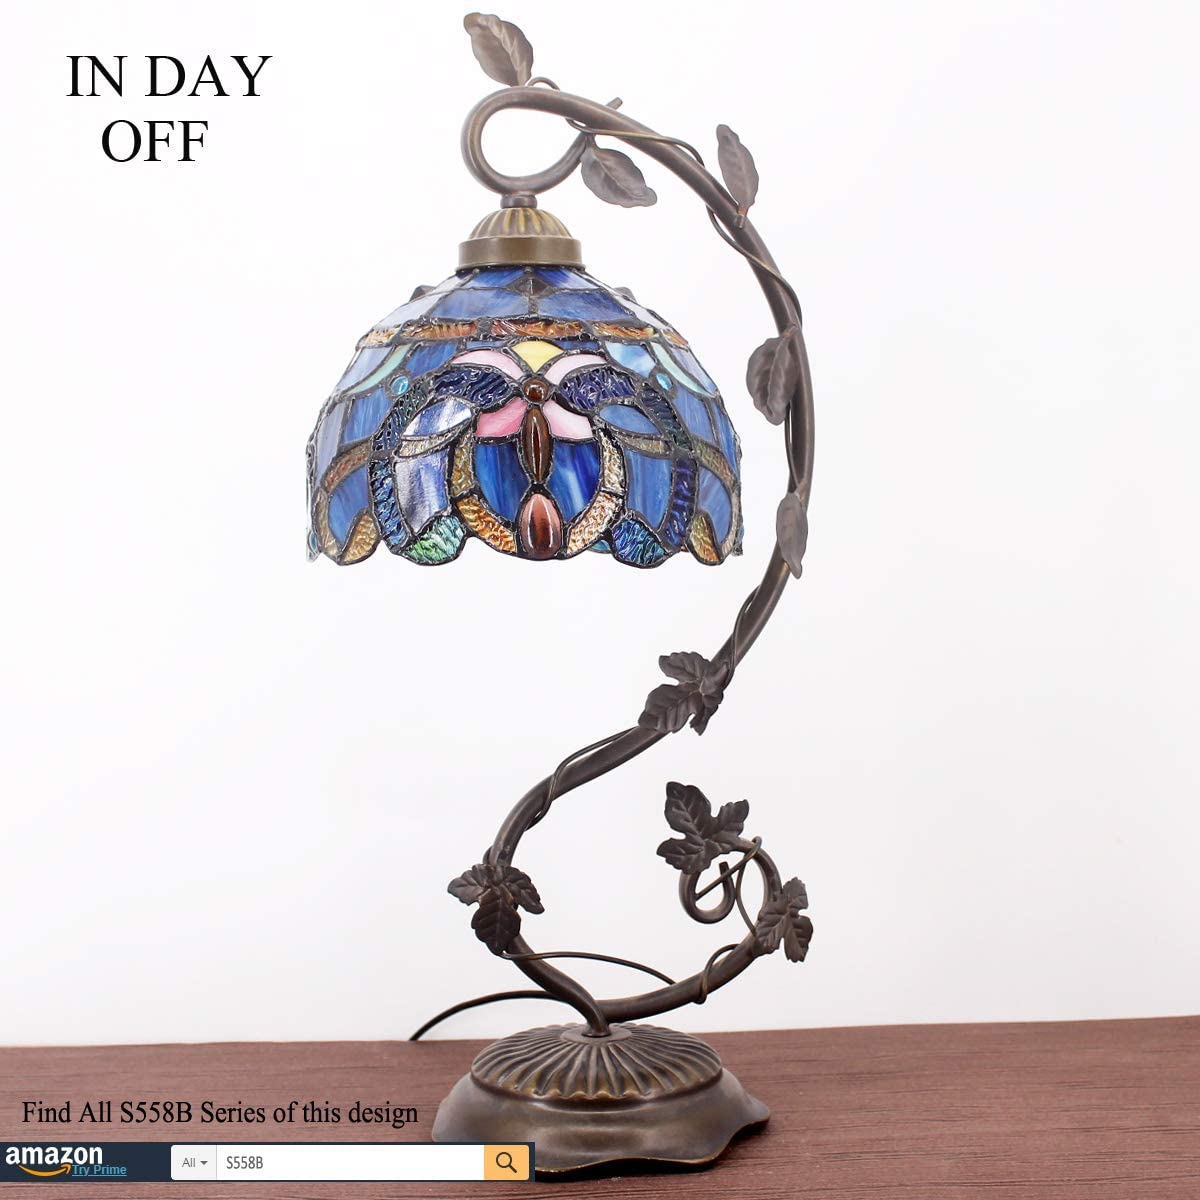 SHADY  Lamp Cloudy Blue Stained Glass Table Lamp  Metal Leaf Base 8X10X21 Inches Reading Desk Light Decor Small Space Bedside Bedroom Home Office S558 Series